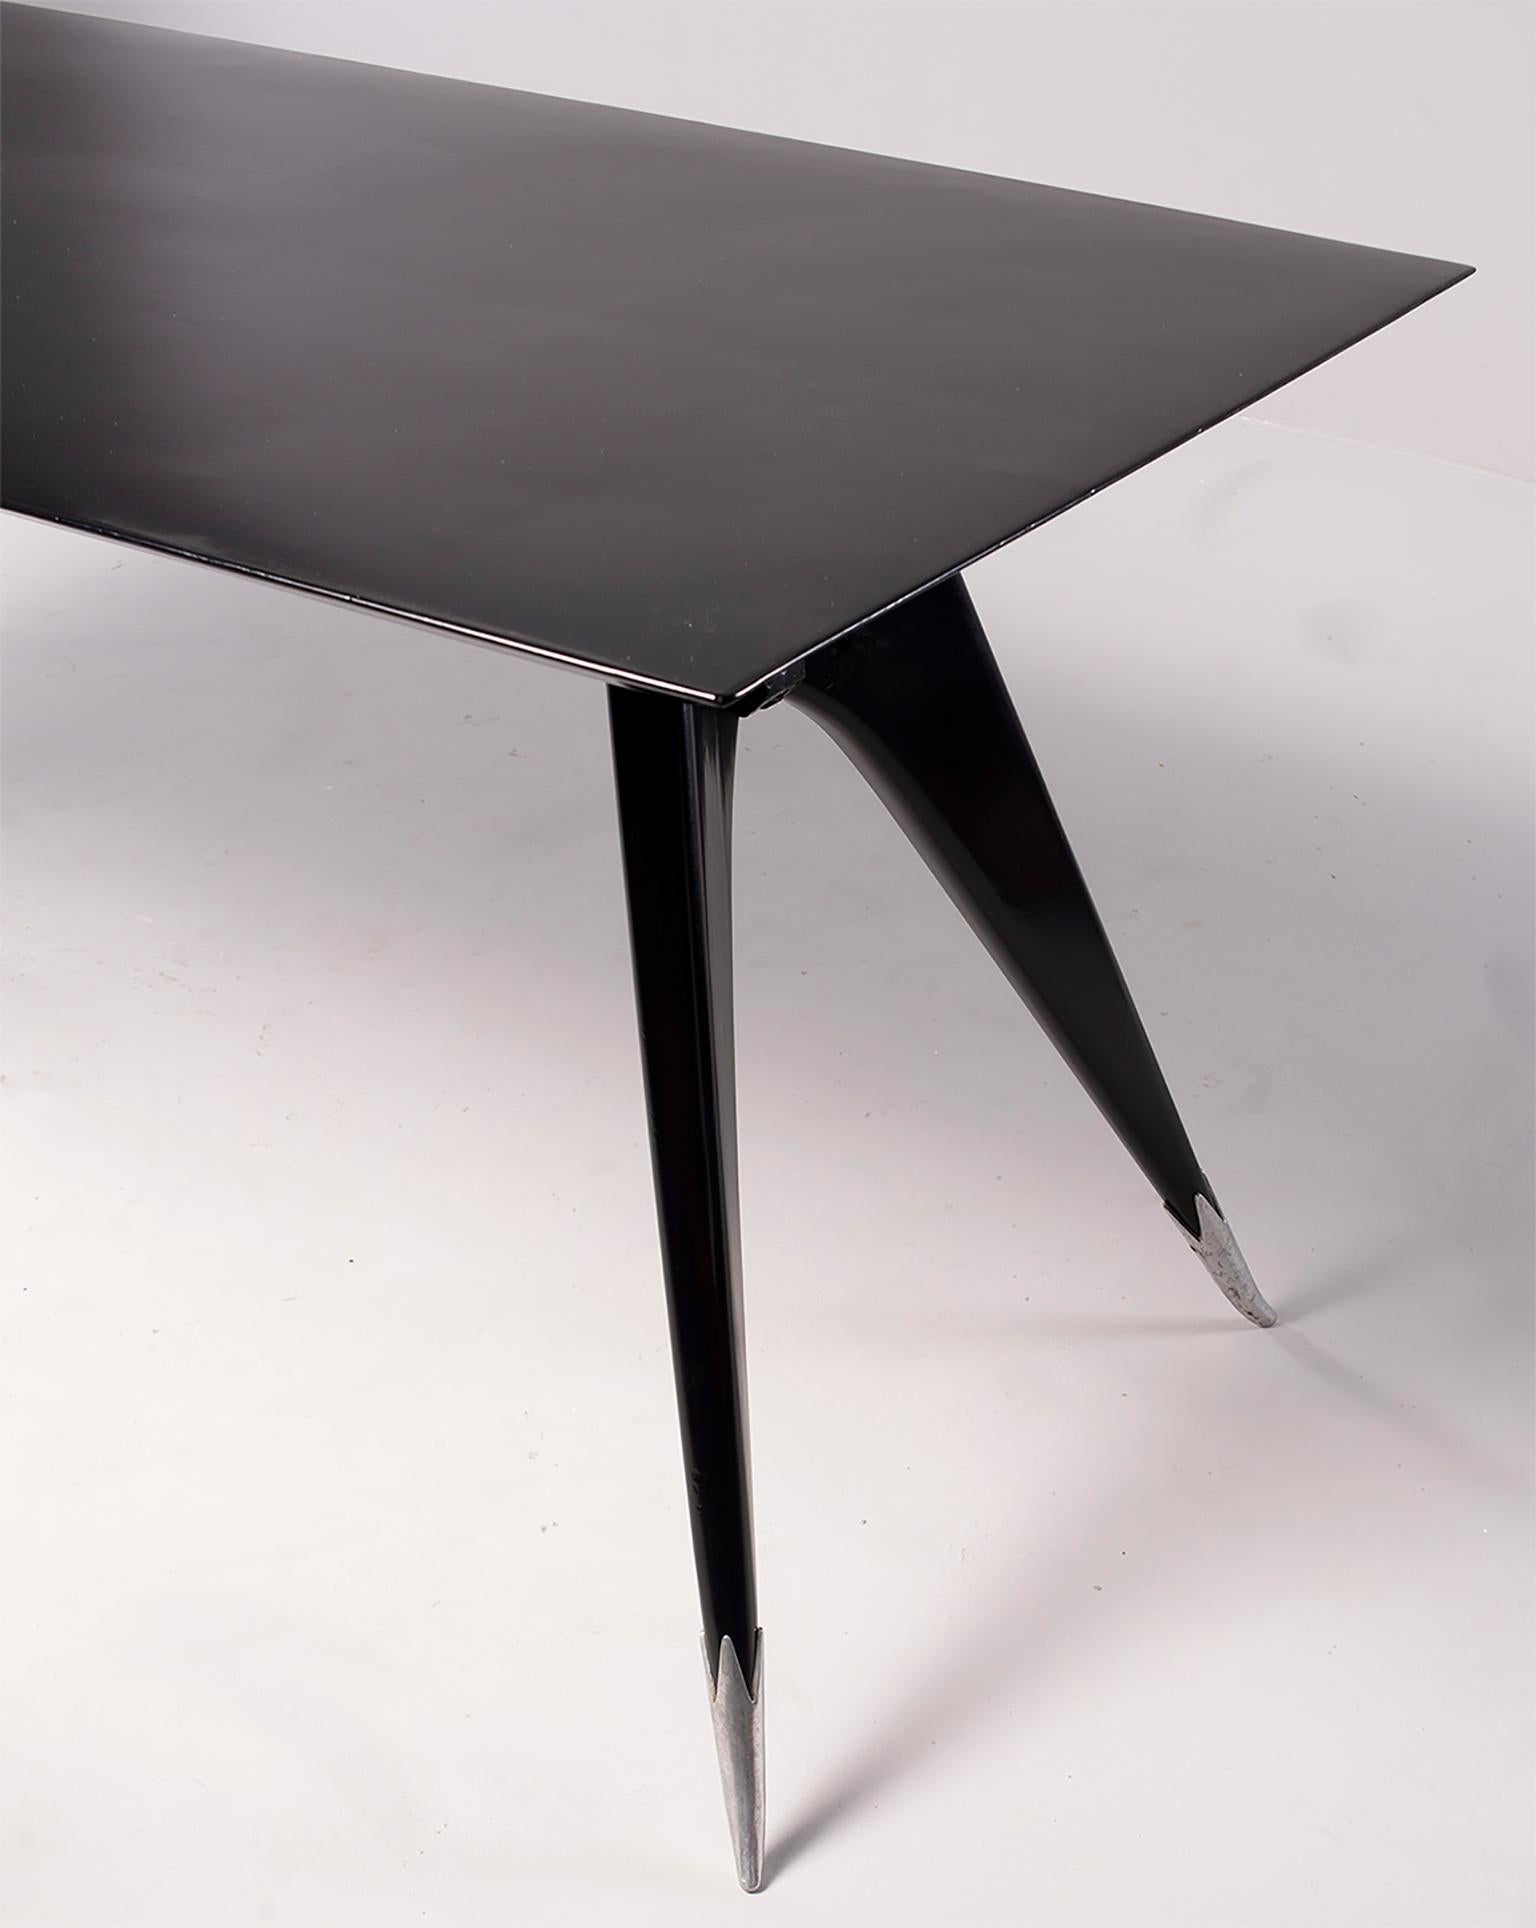 Midcentury Italian Ebonized Dining Table with Tapered Legs and Silver Leg Caps 7